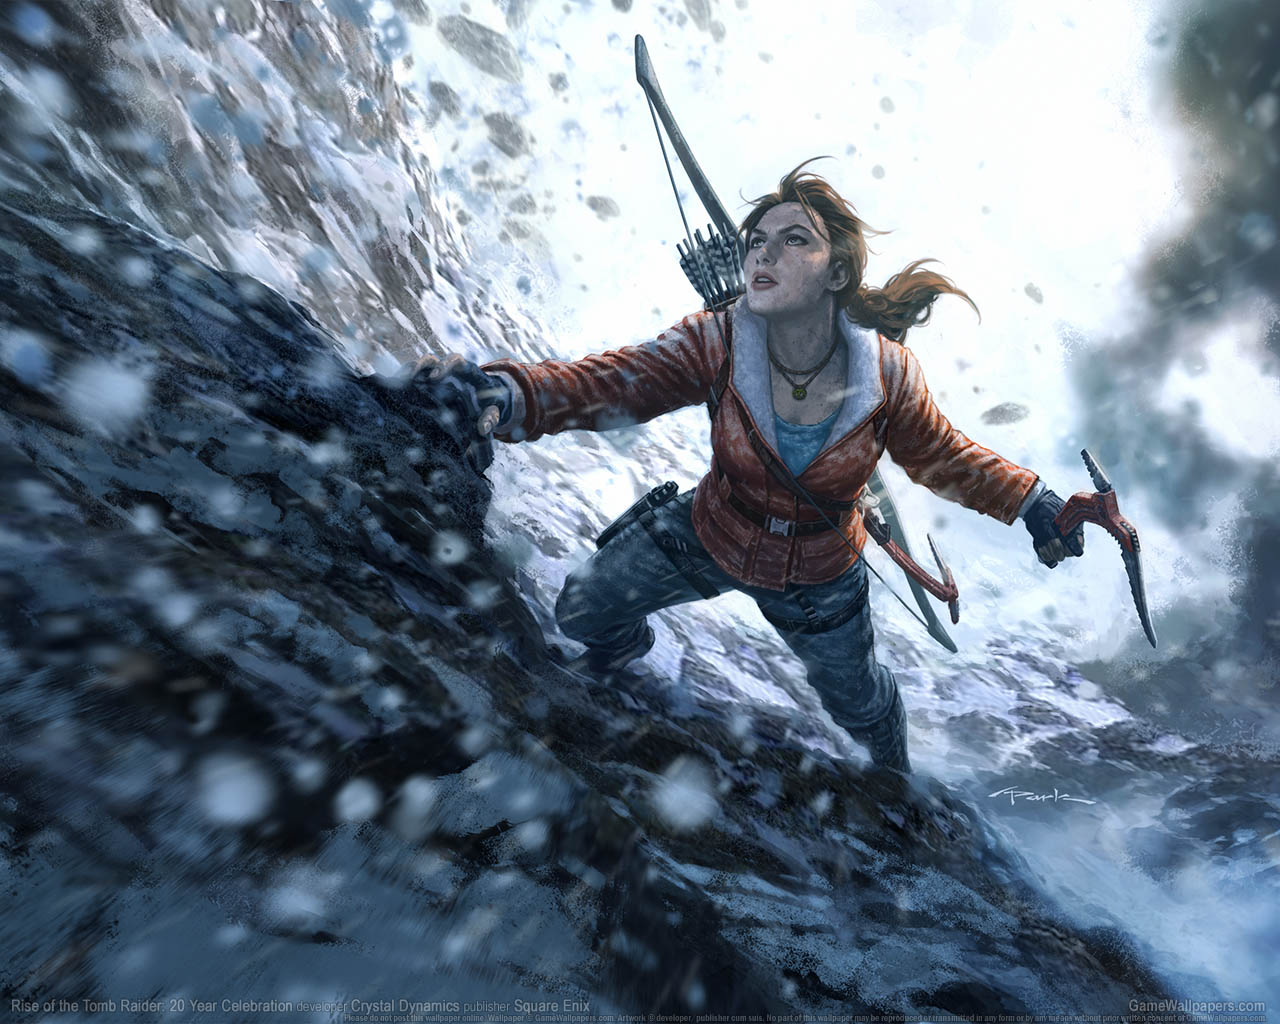 Rise of the Tomb Raider%3A 20 Year Celebration achtergrond 02 1280x1024